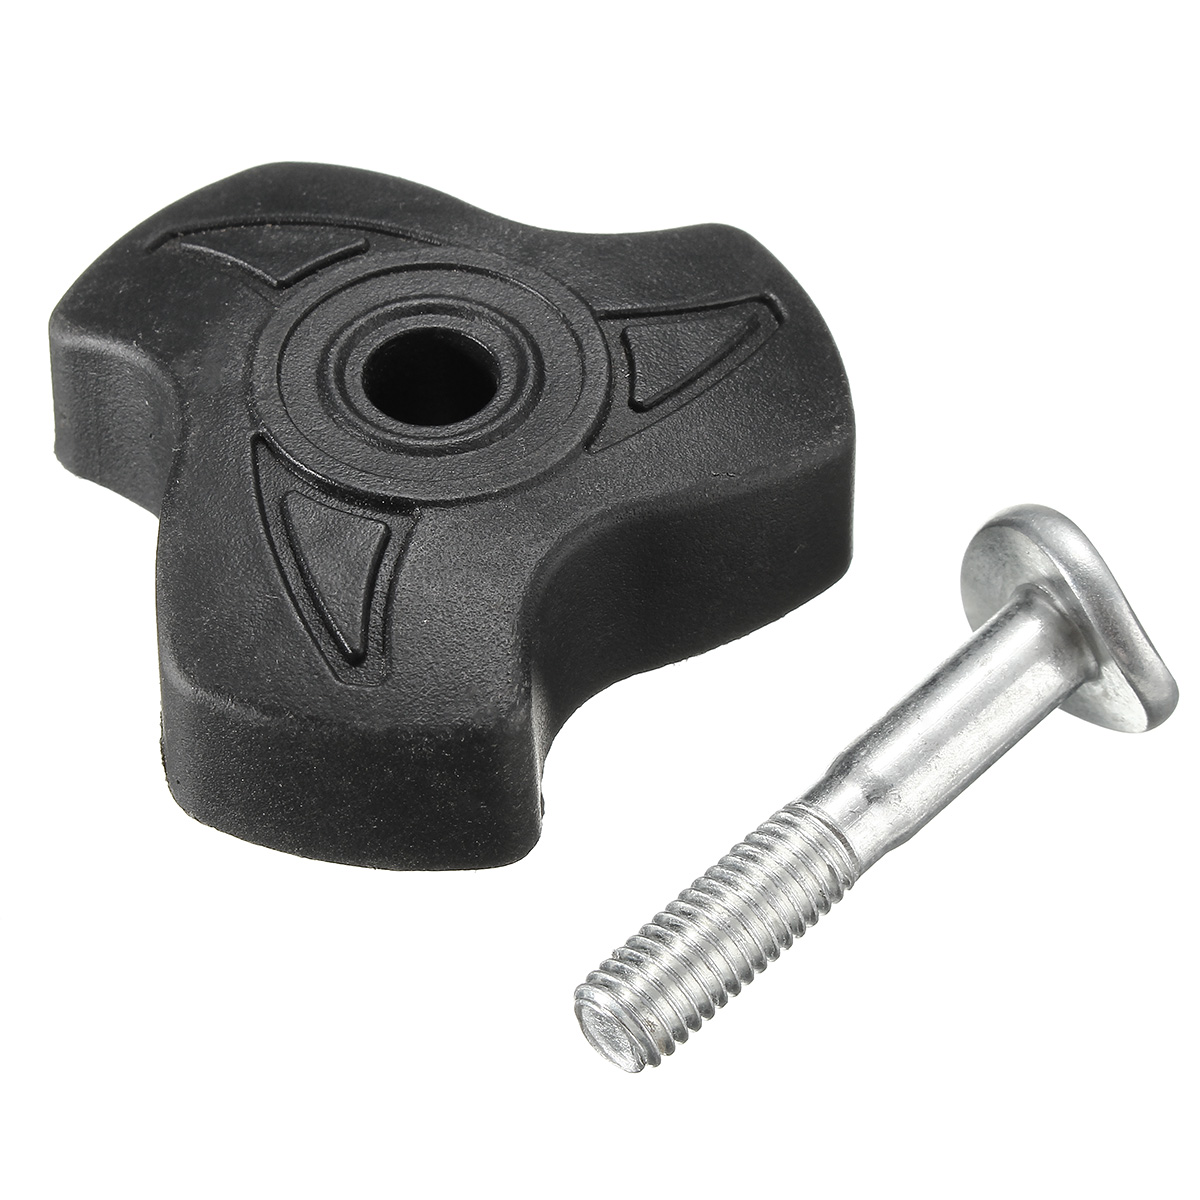 Handle-Bar-Fixings-8mm-Nut-Bolts-Screws-Thread-35mm-For-Many-Lawnmowers-1300090-5